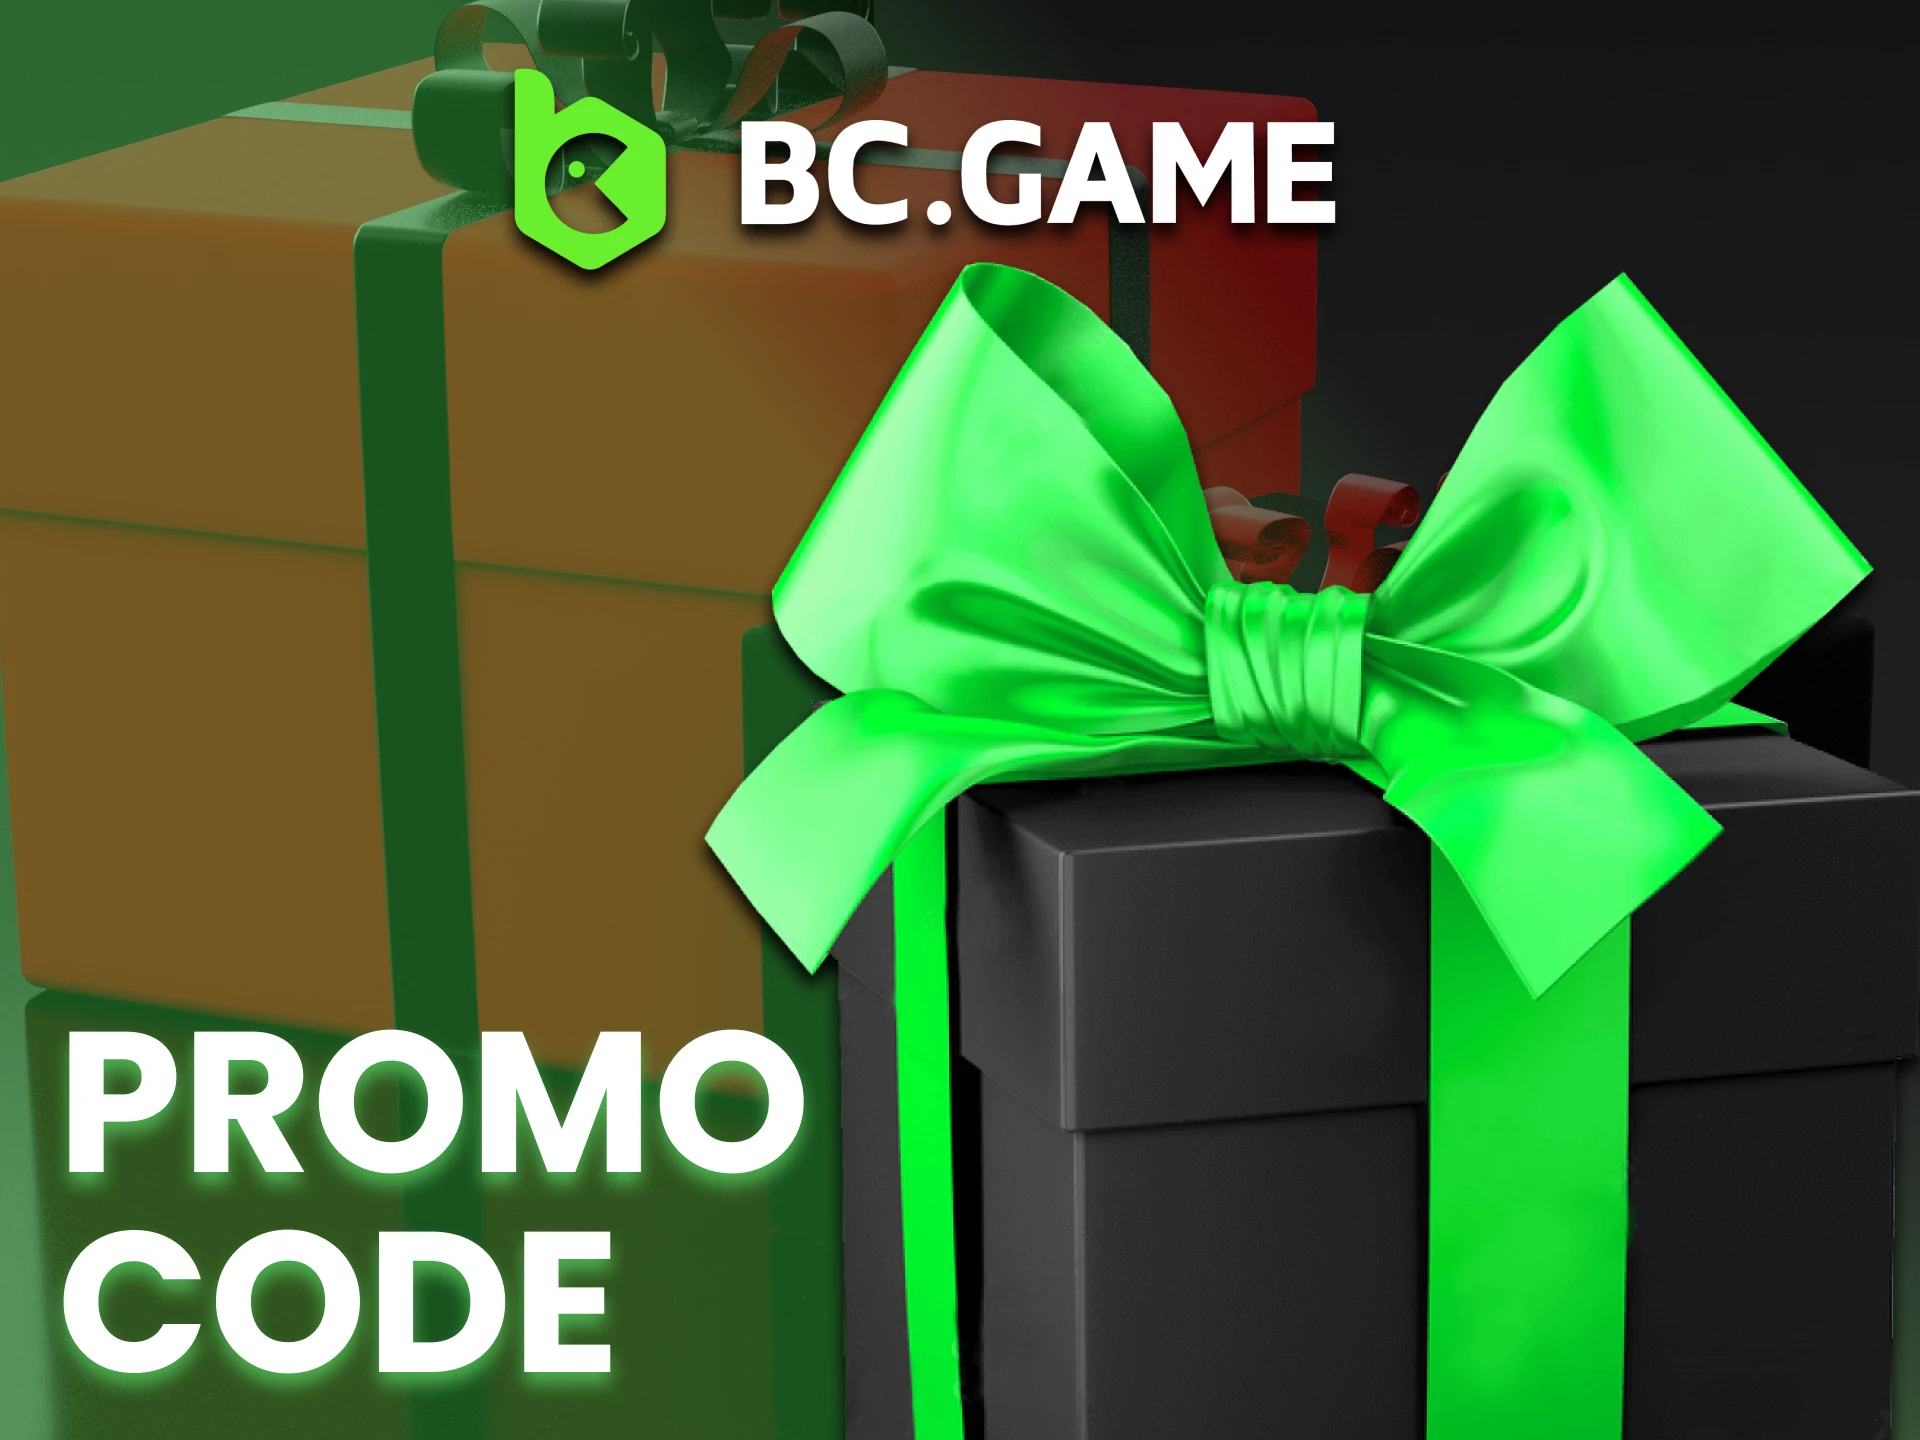 Insert your exclusive BC Game promocode during registration.